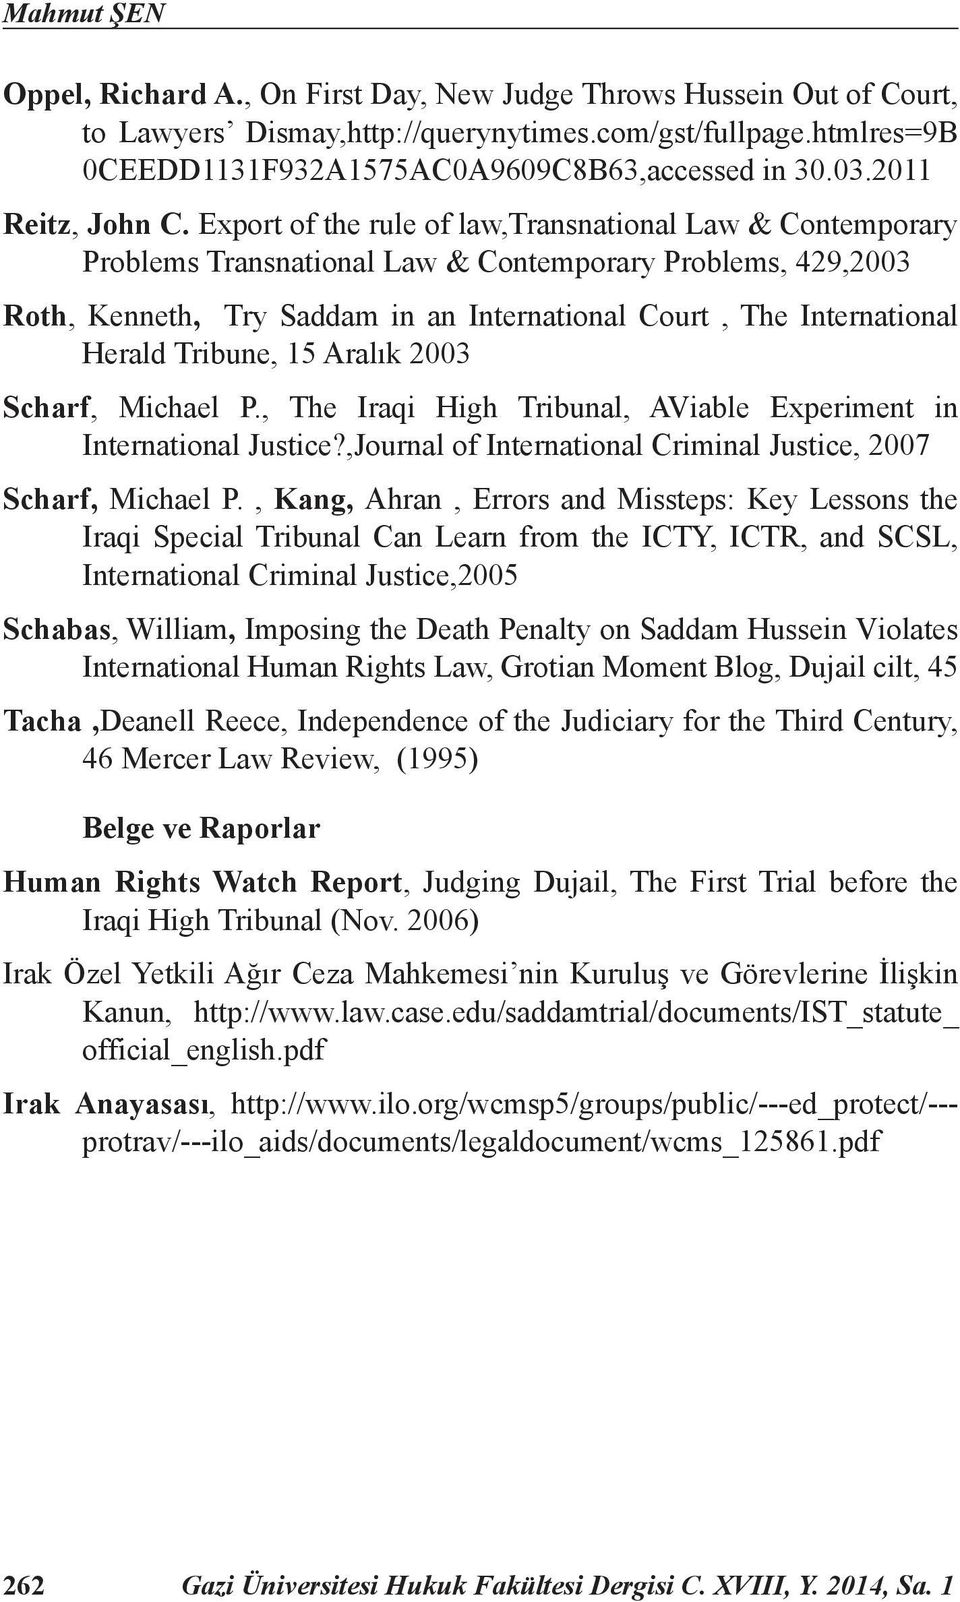 Export of the rule of law,transnational Law & Contemporary Problems Transnational Law & Contemporary Problems, 429,2003 Roth, Kenneth, Try Saddam in an International Court, The International Herald